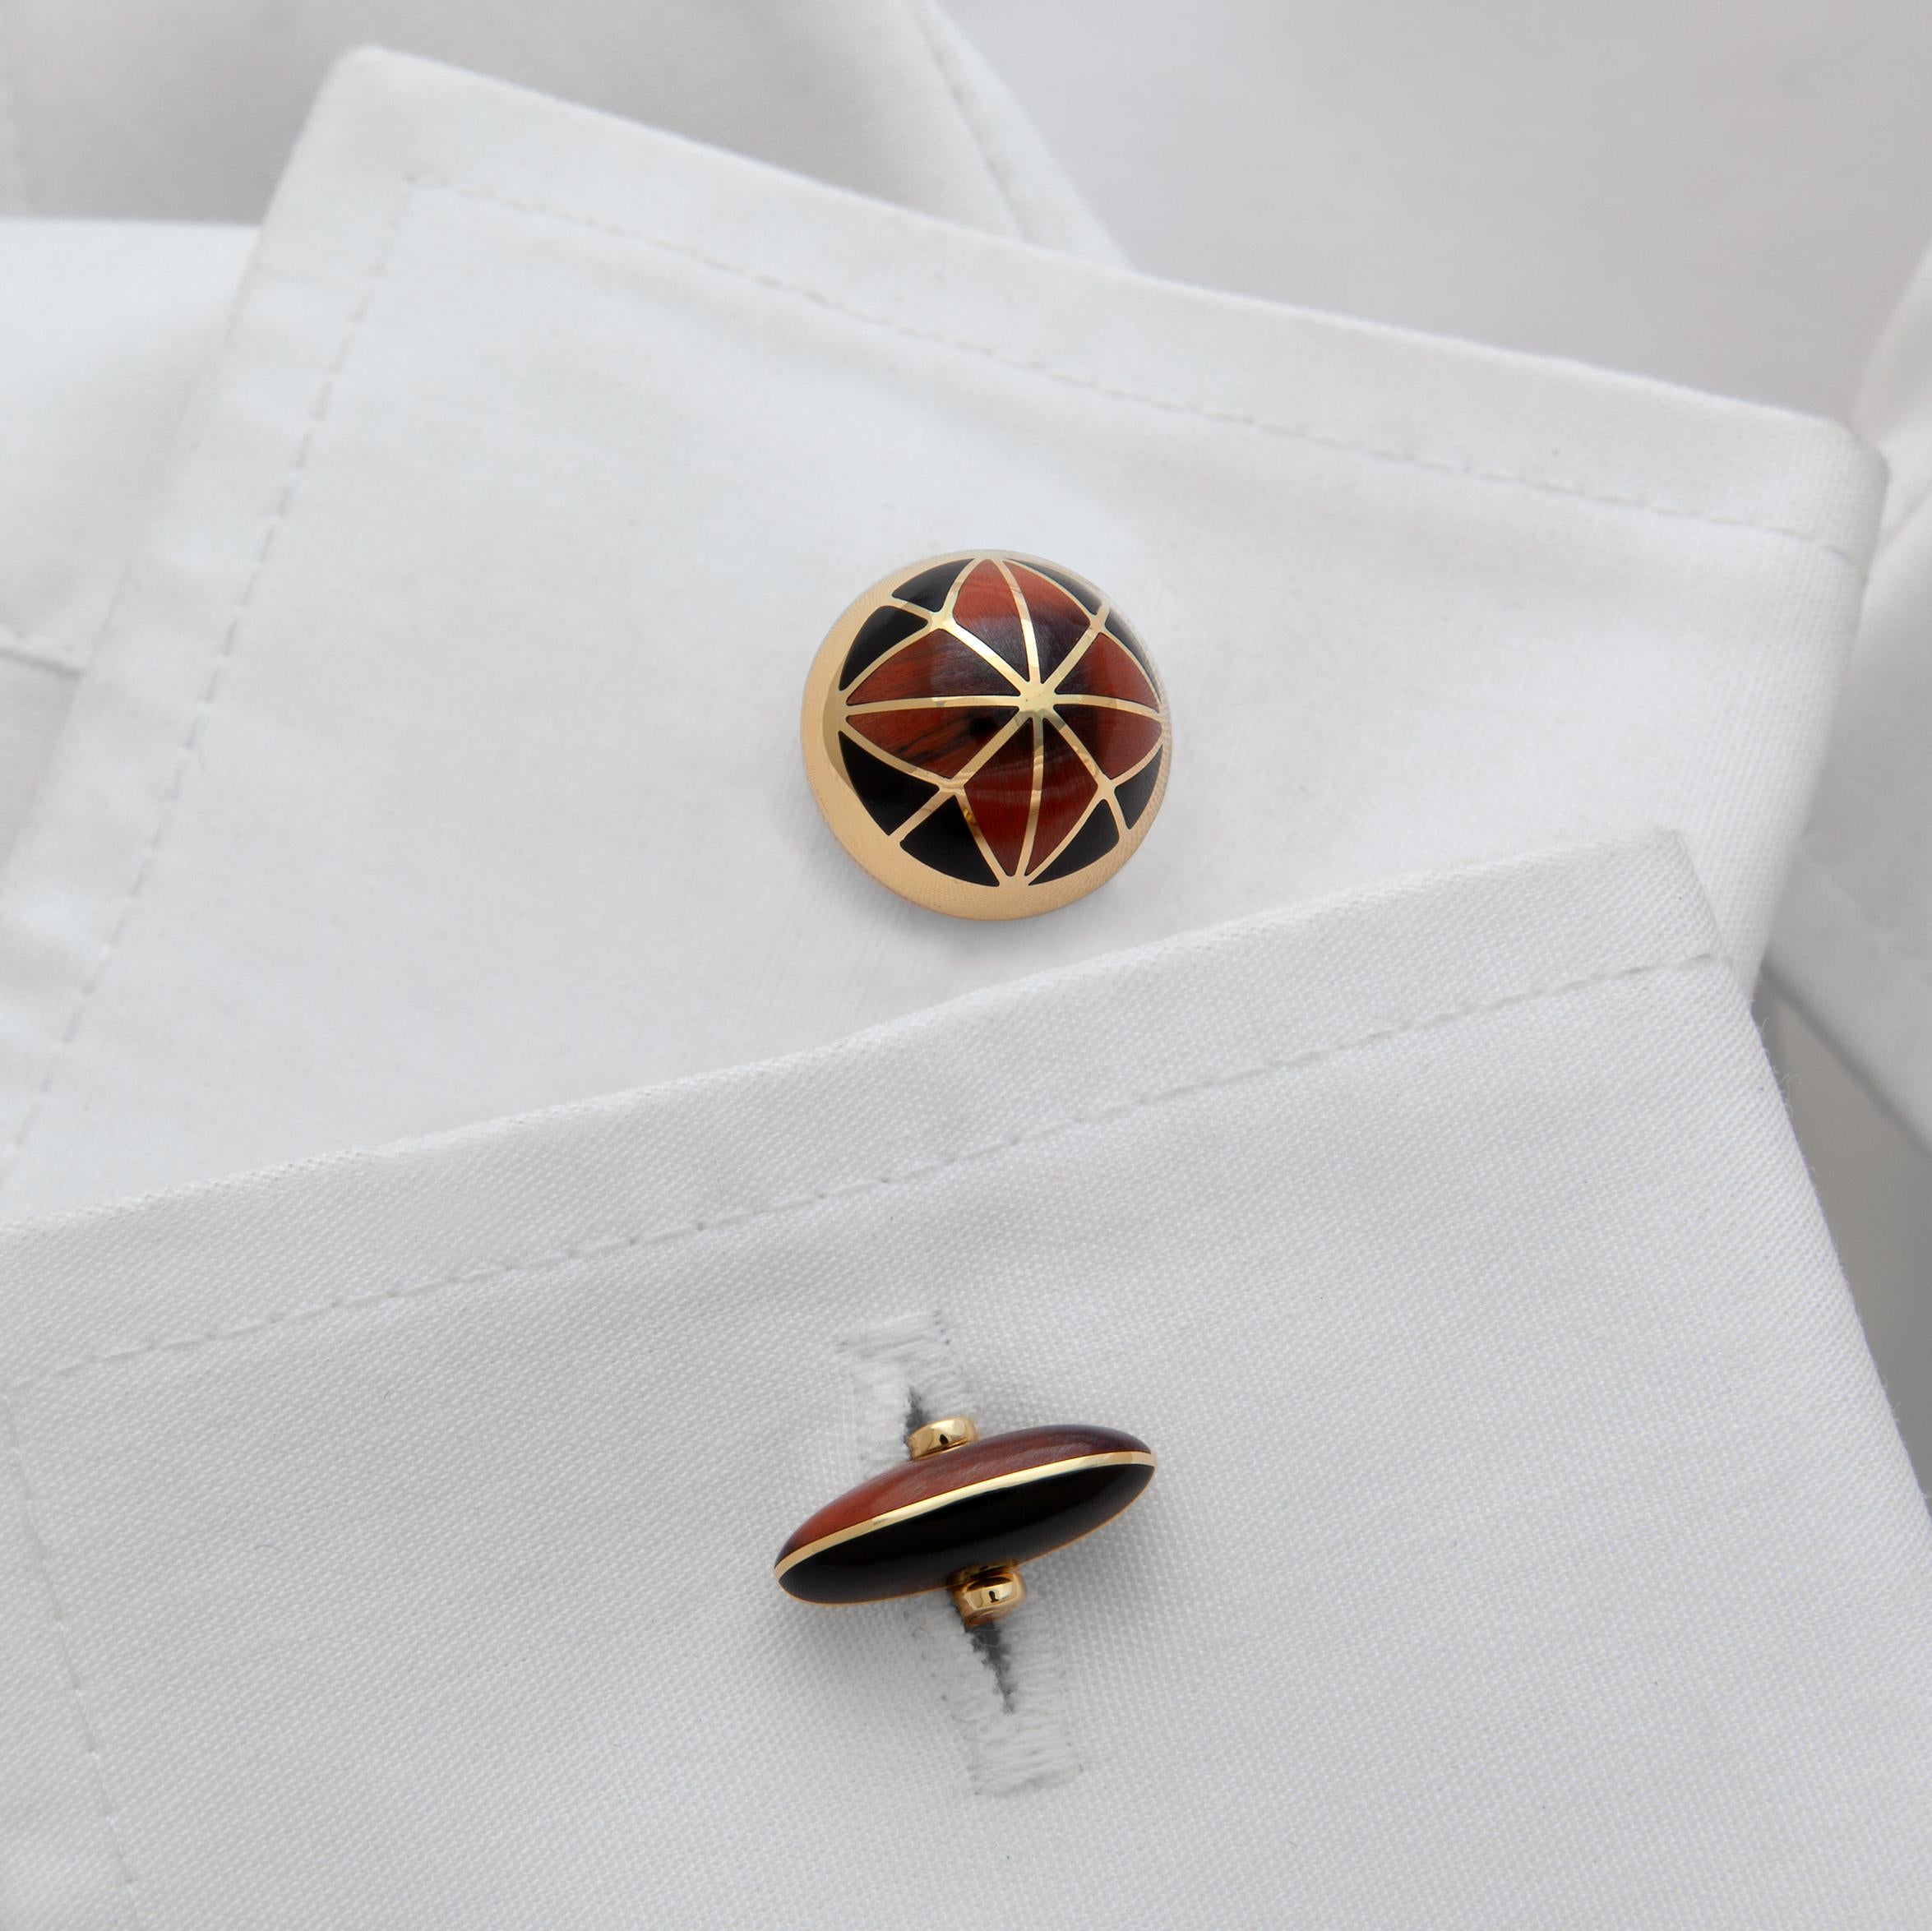 Valerie Jo Coulson, Black Jade and Tiger's Eye Inlaid Gold Cufflinks In New Condition For Sale In Pequea, PA